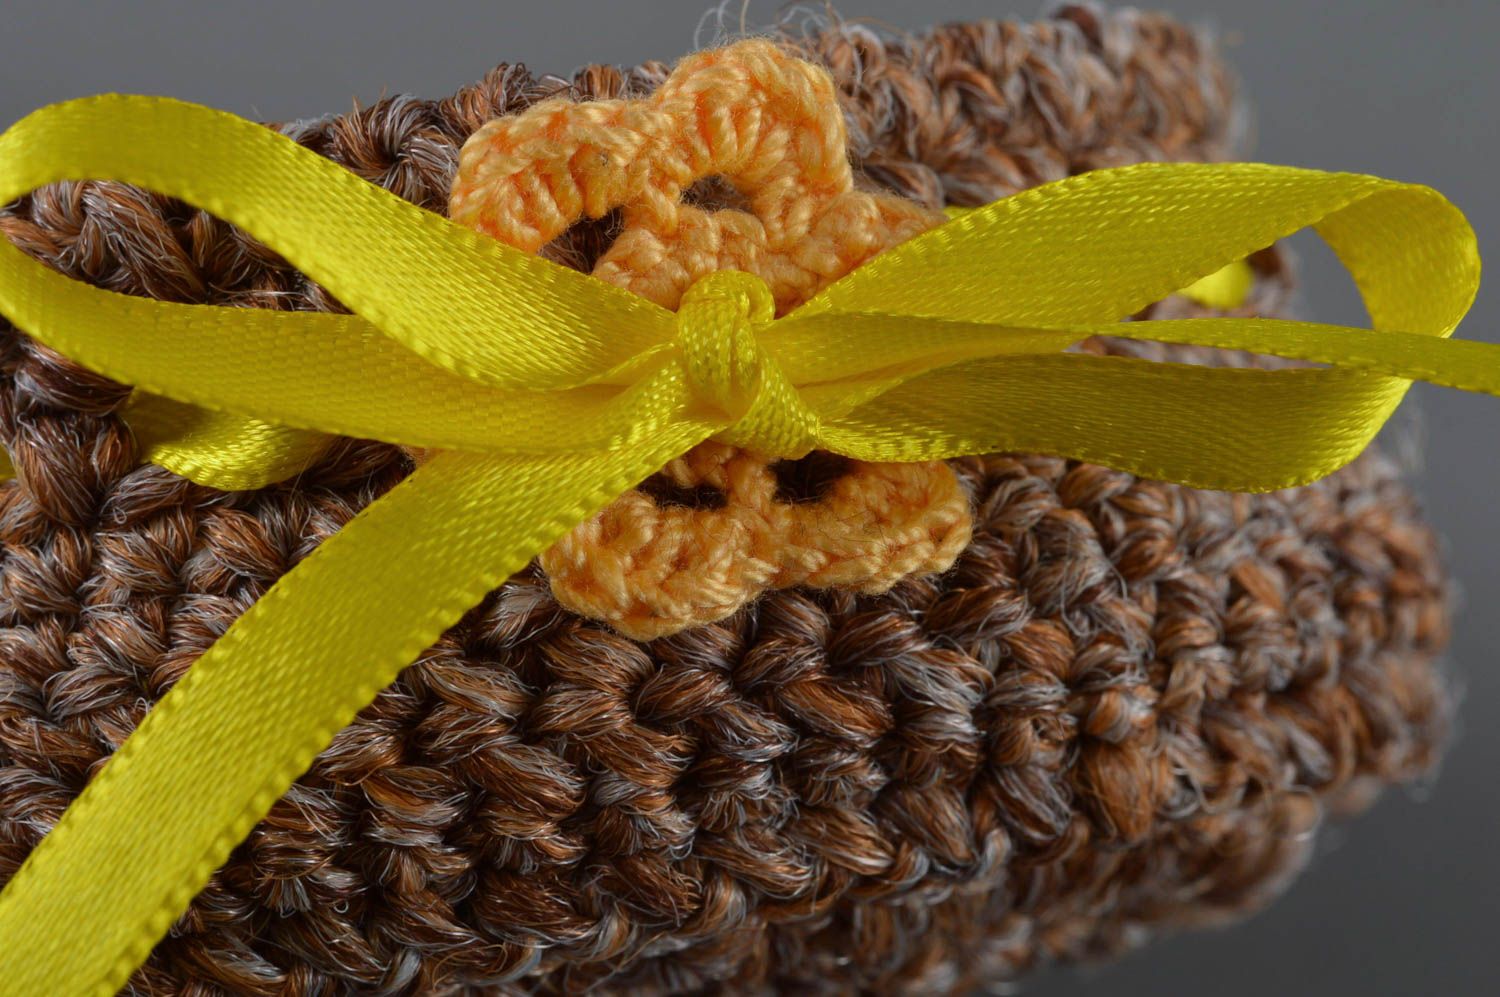 Handmade brown synthetic crocheted toy in the form of basket home decor photo 2